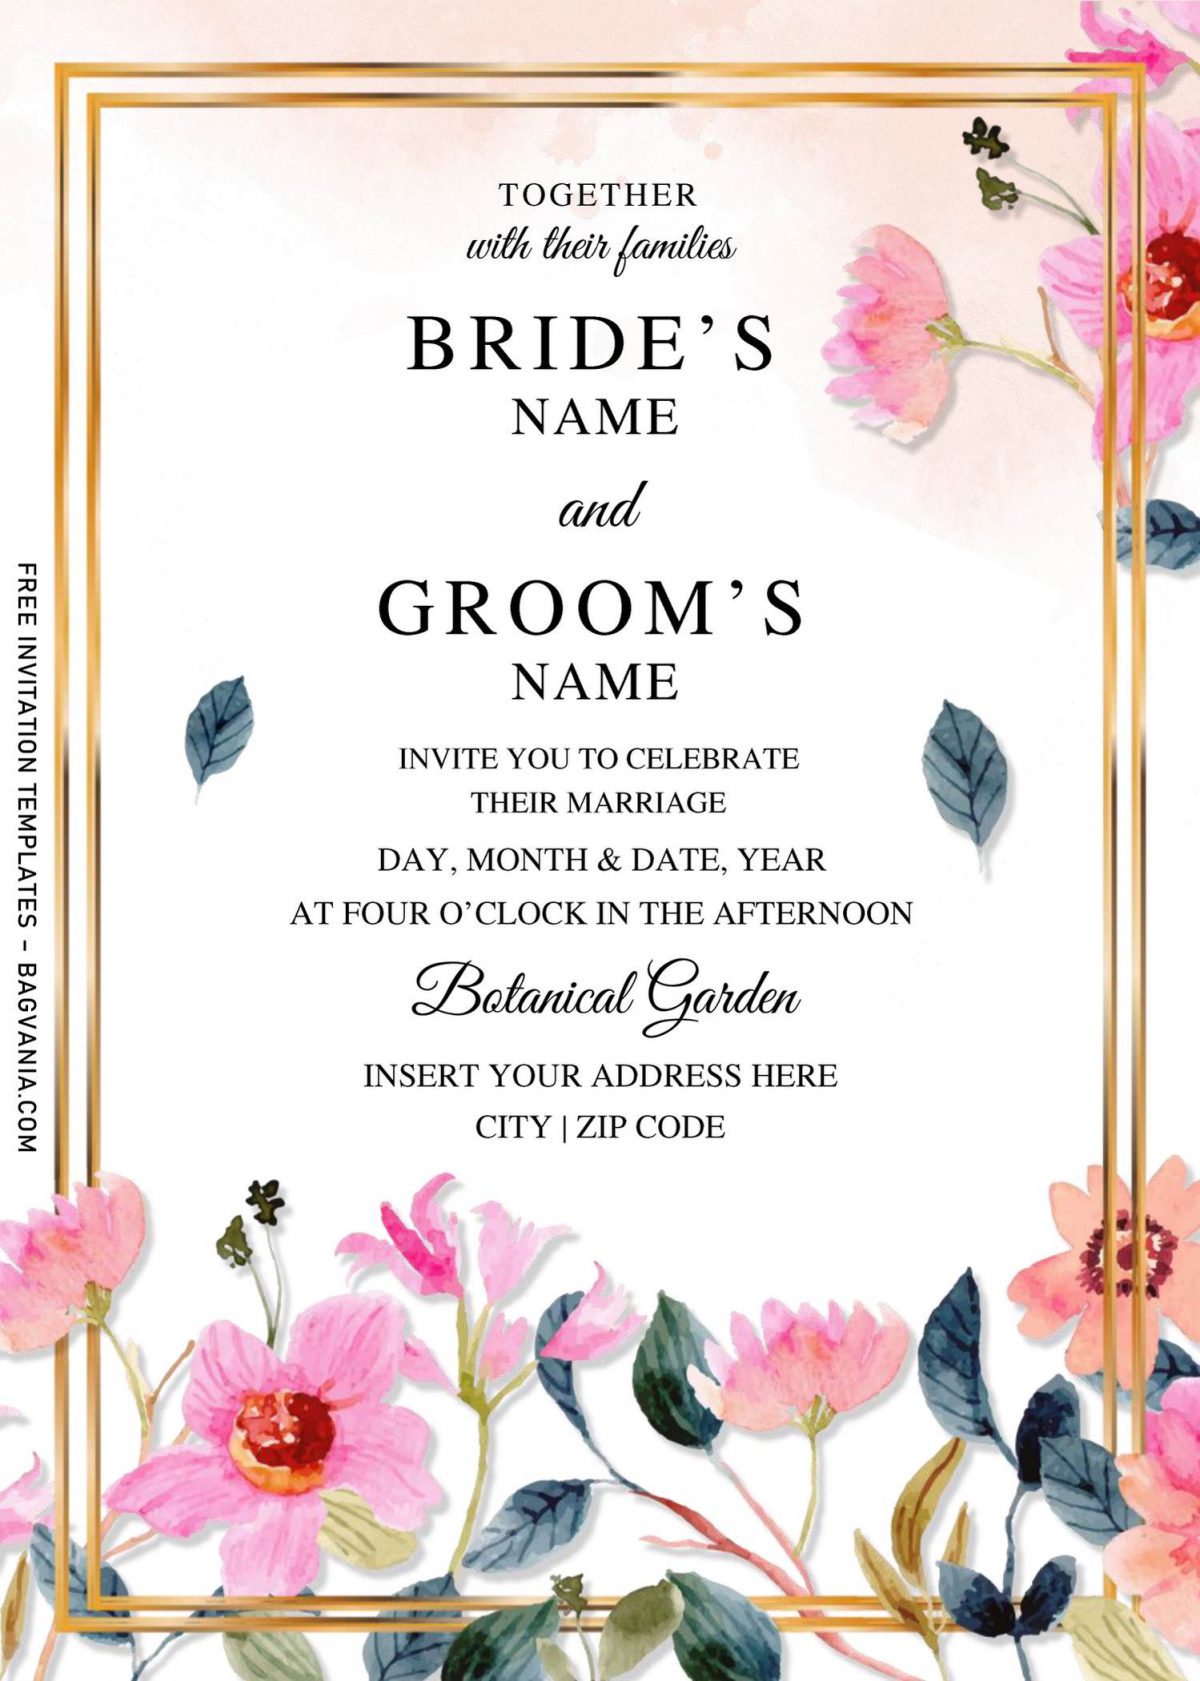 Free Peach Flower Wedding Invitation Templates For Word and has peach background